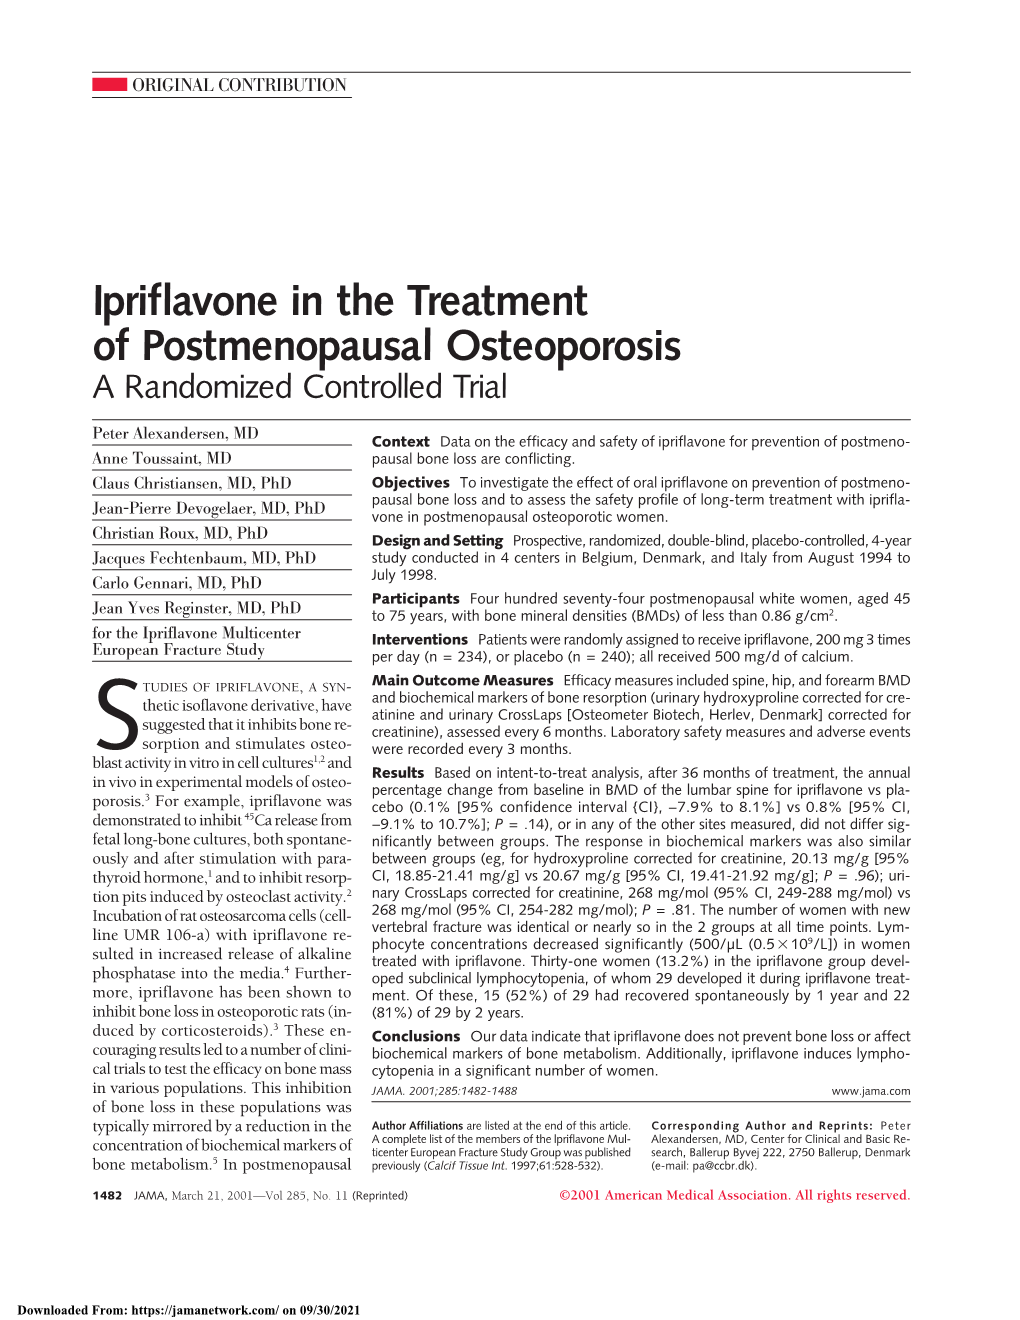 Ipriflavone in the Treatment of Postmenopausal Osteoporosis a Randomized Controlled Trial